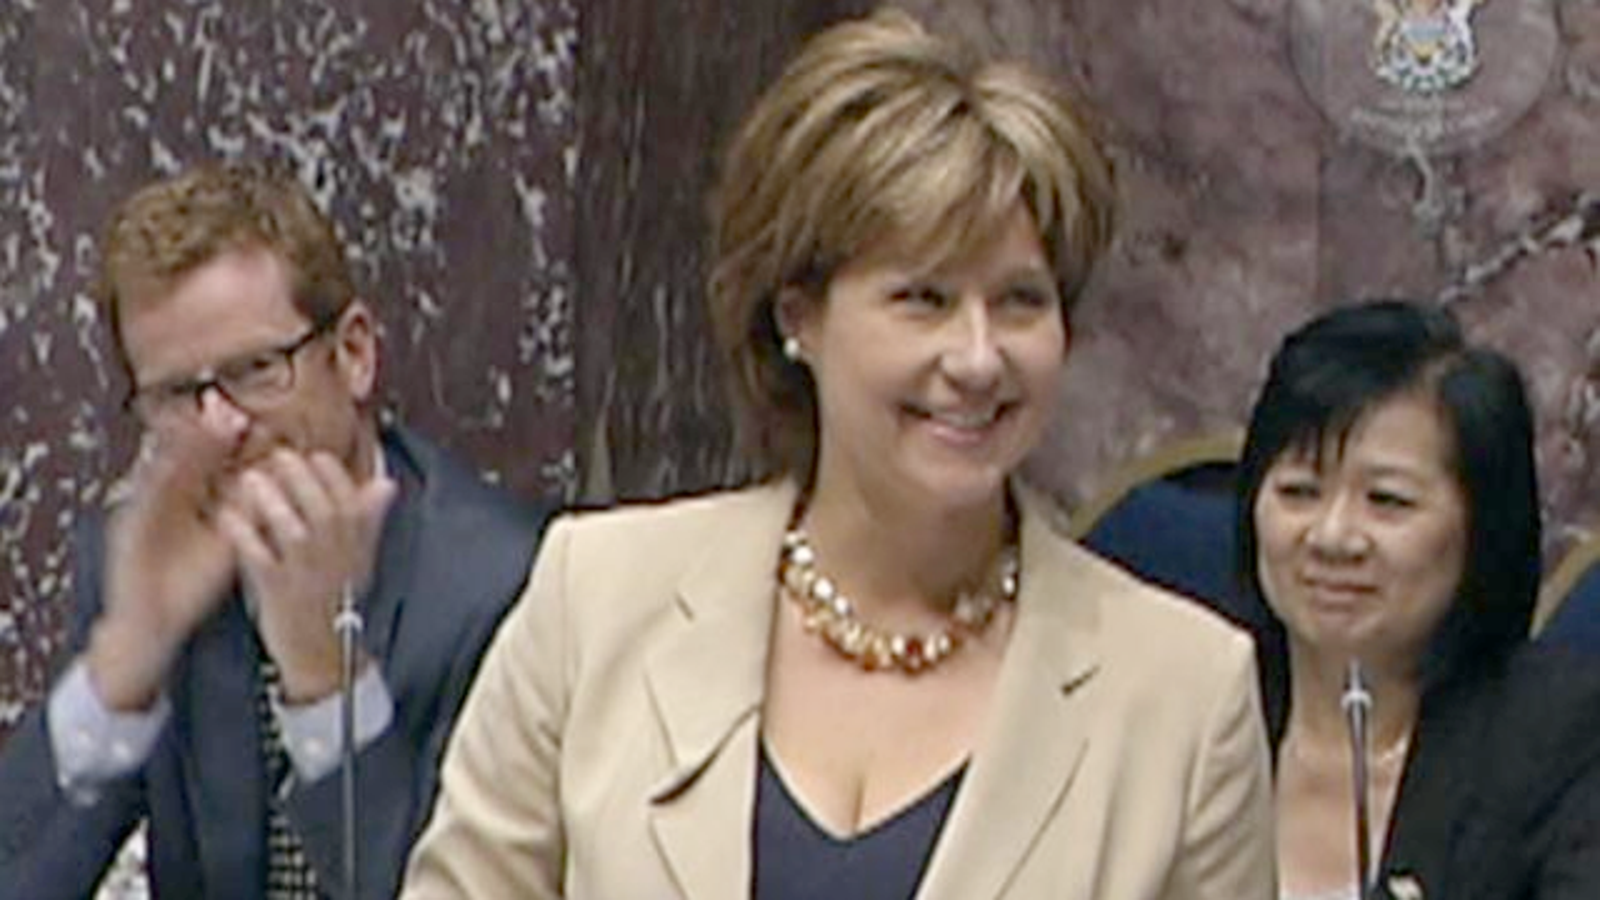 Canadian Politician Criticized For Showing Too Much Cleavage